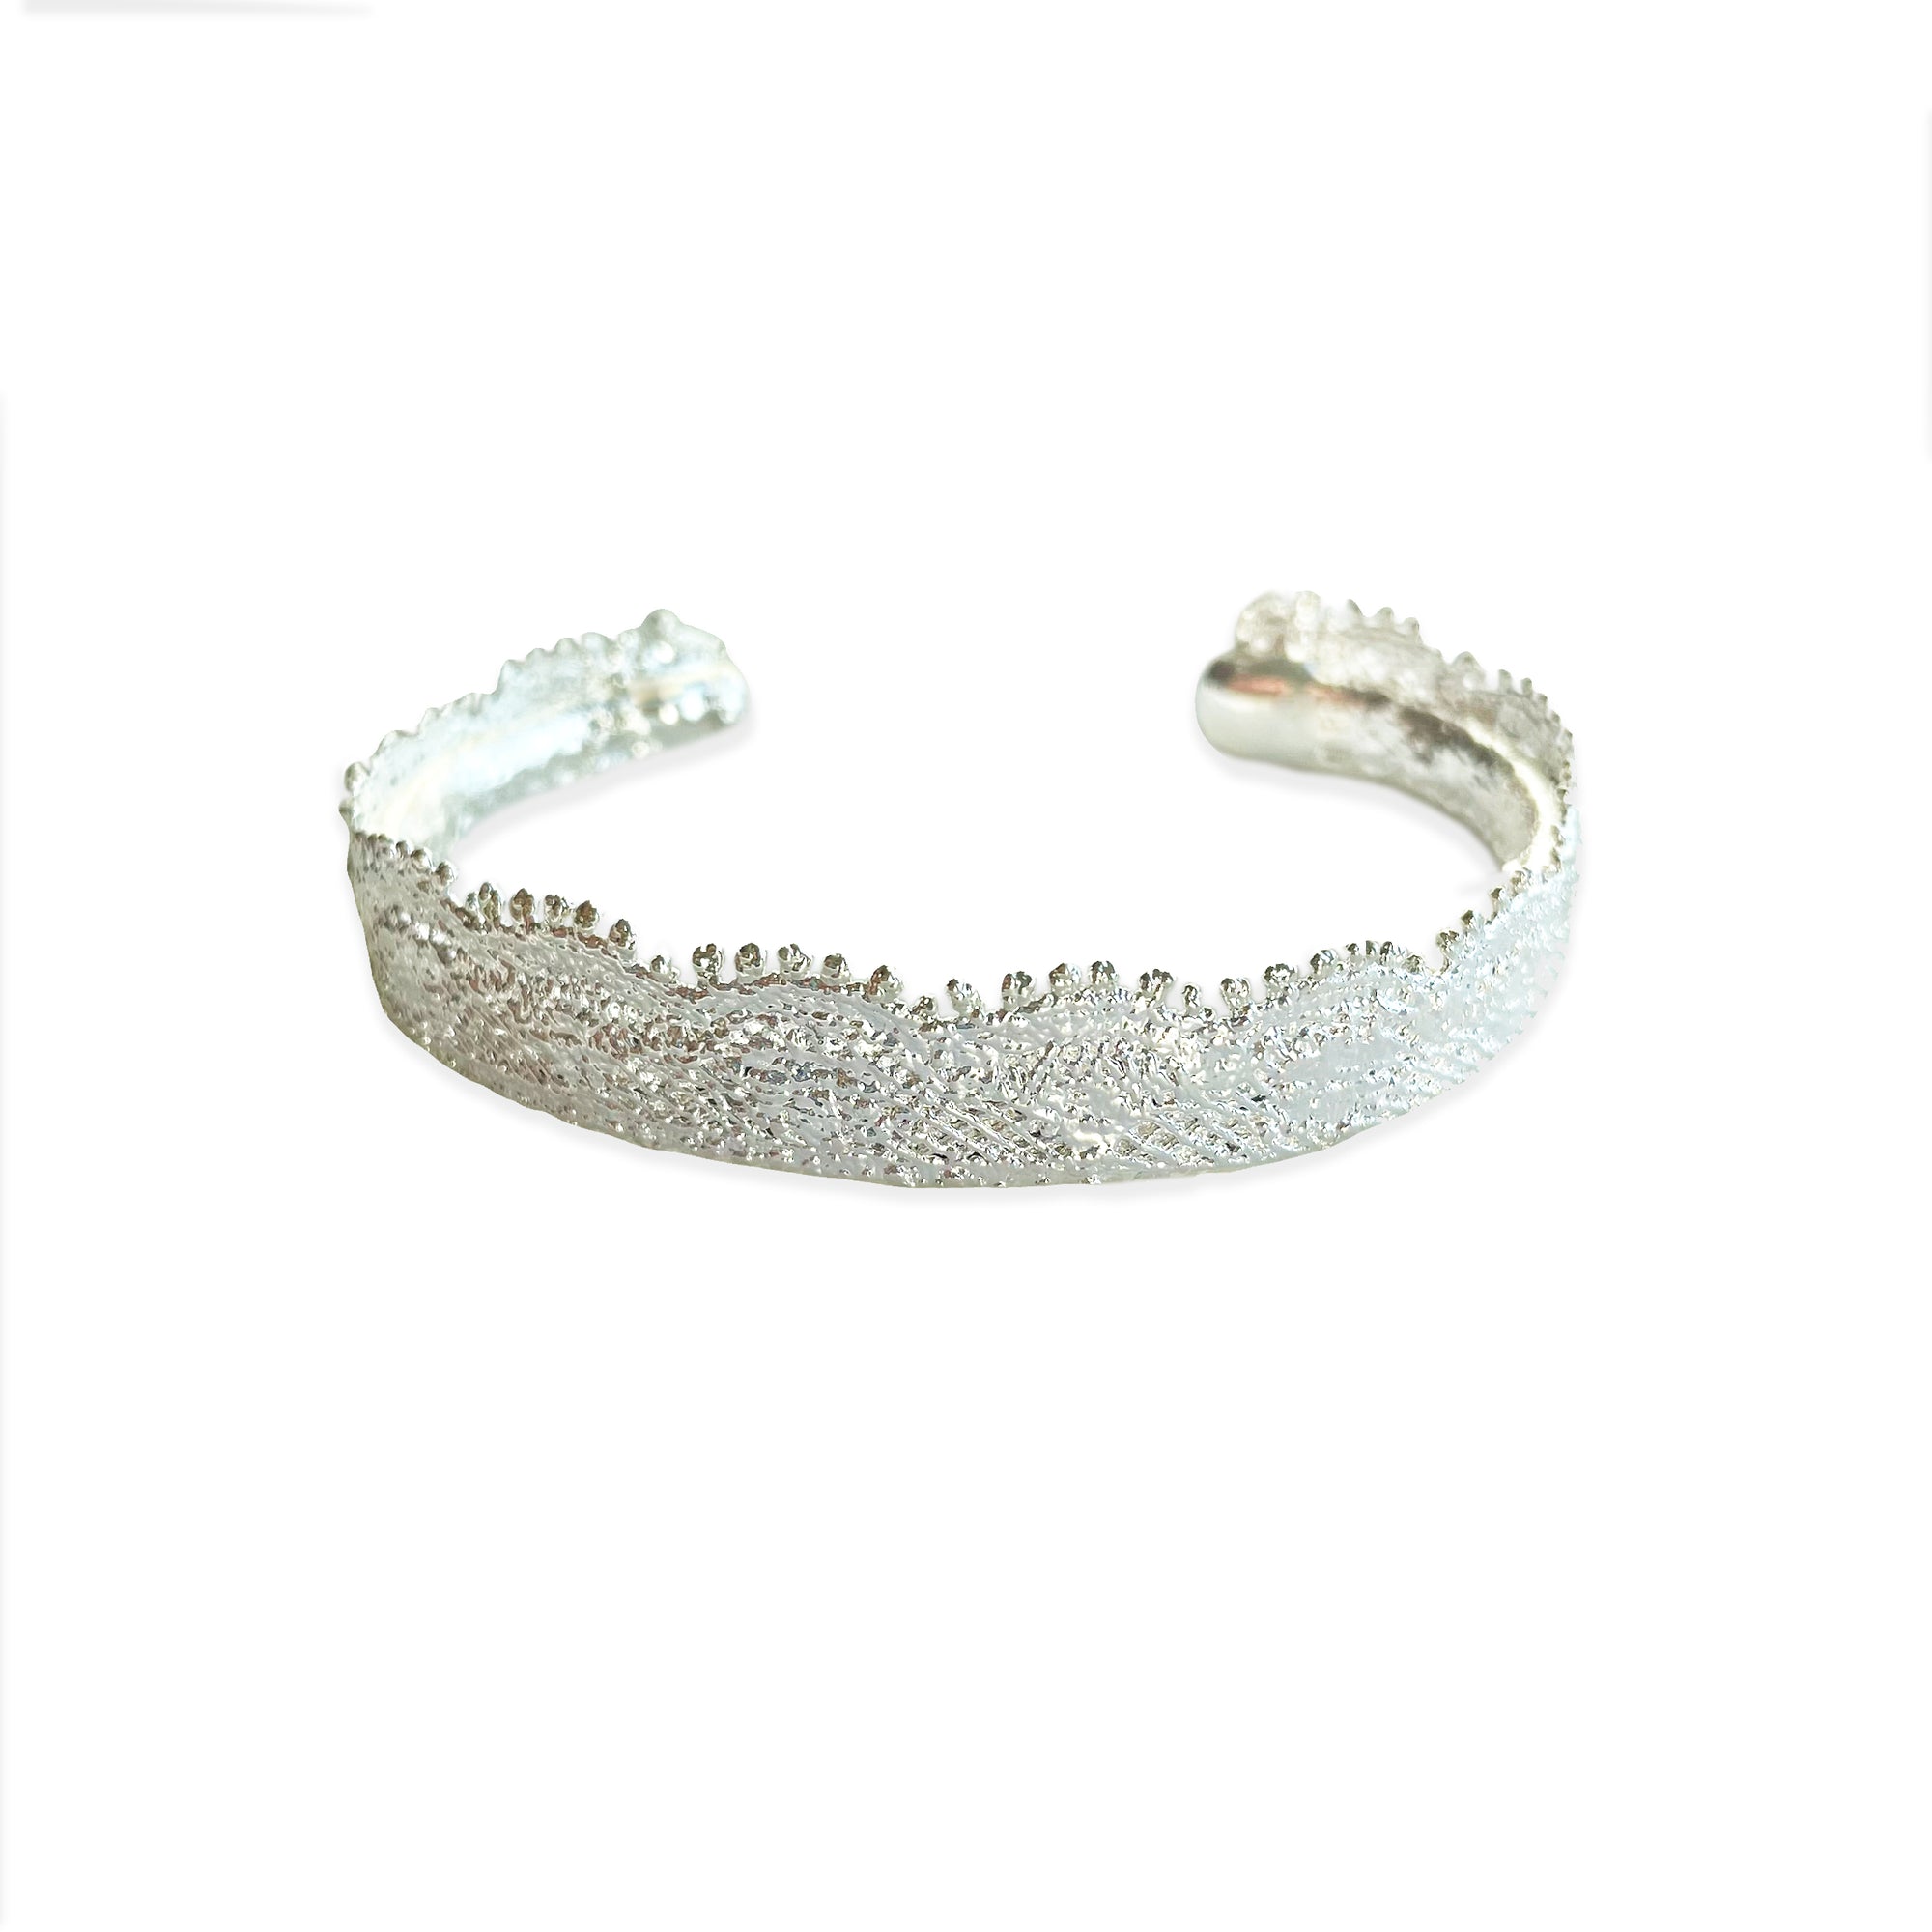 Lace bangle bracelet in sterling silver. Signed and numbered in the back.